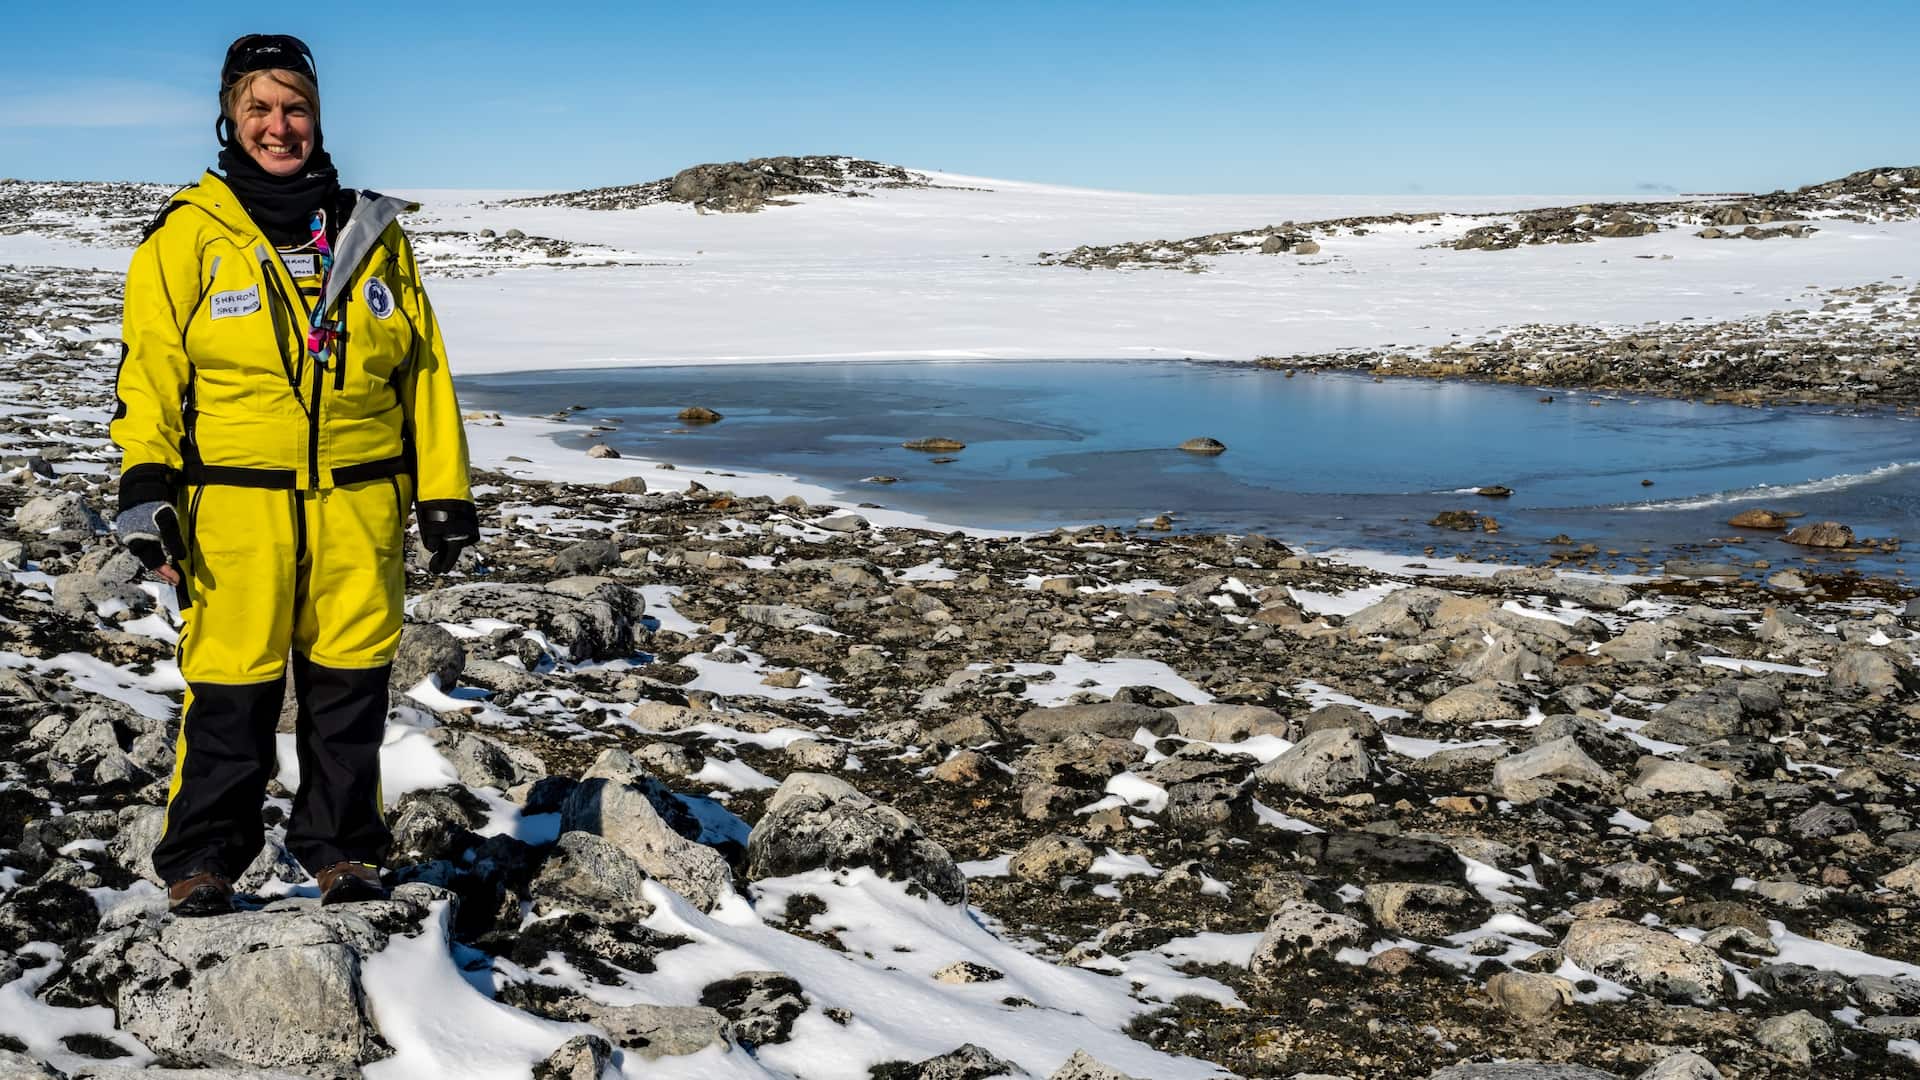 Sharon Robinson wears a yellow snow suit as she stands in the snow of Antarctica. Photo: Supplied